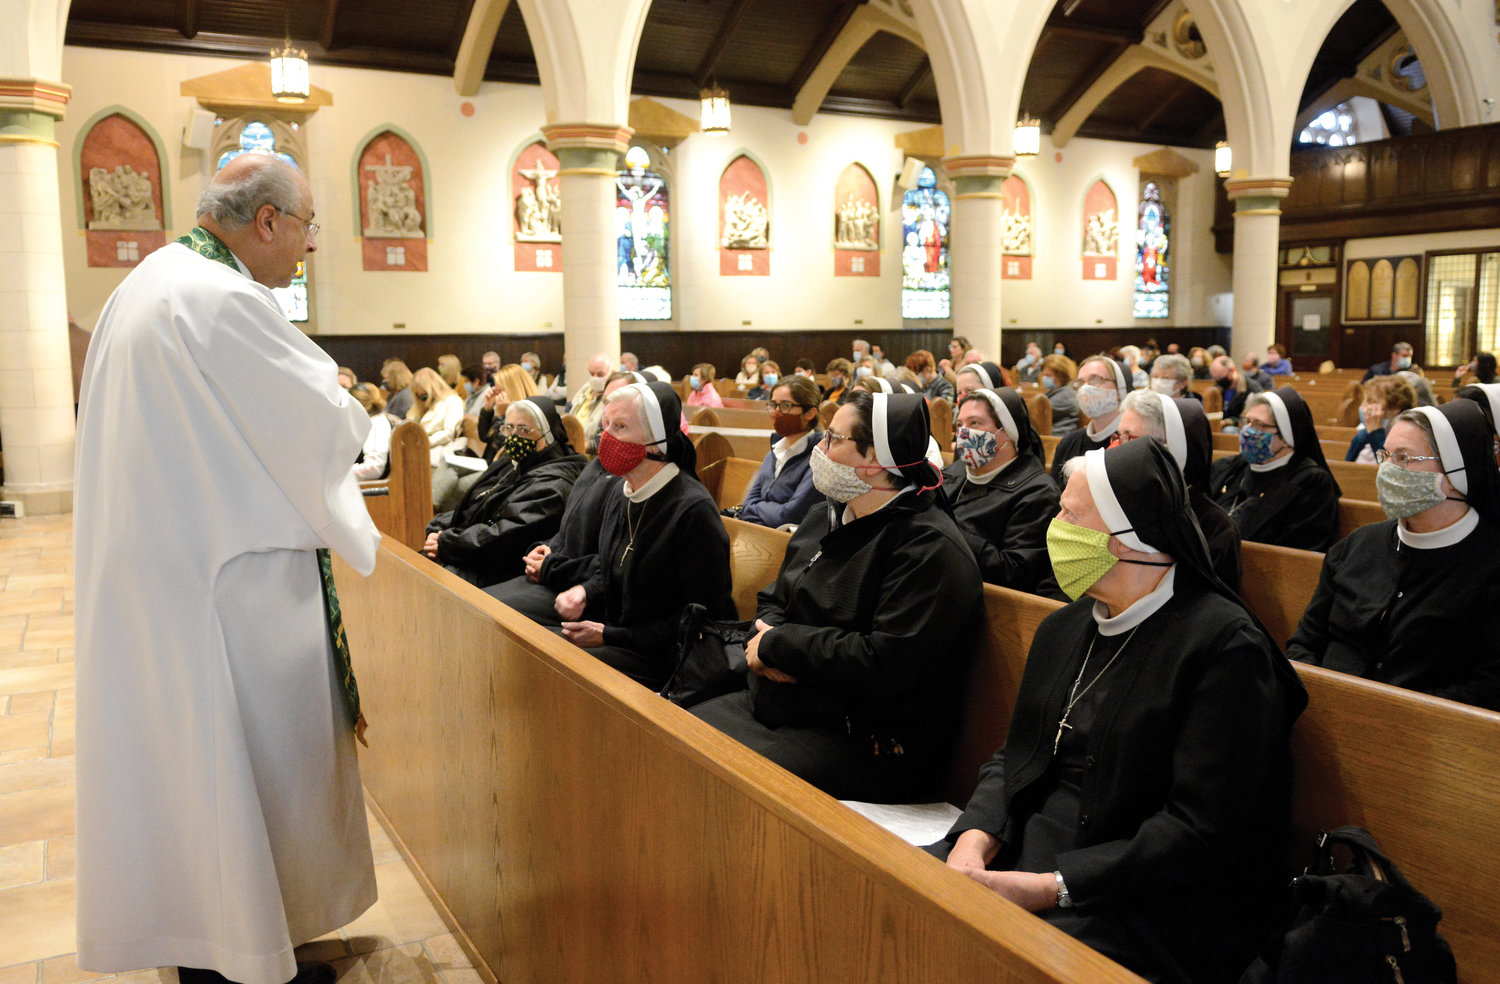 Father Anthony Sorgie, pastor of Immaculate Conception and Assumption of Our Lady parish, converses with women religious of Blessed Clelia’s order before the Mass he celebrated. Approximately 30 sisters attended the liturgy, which included a blessing of the shrine.